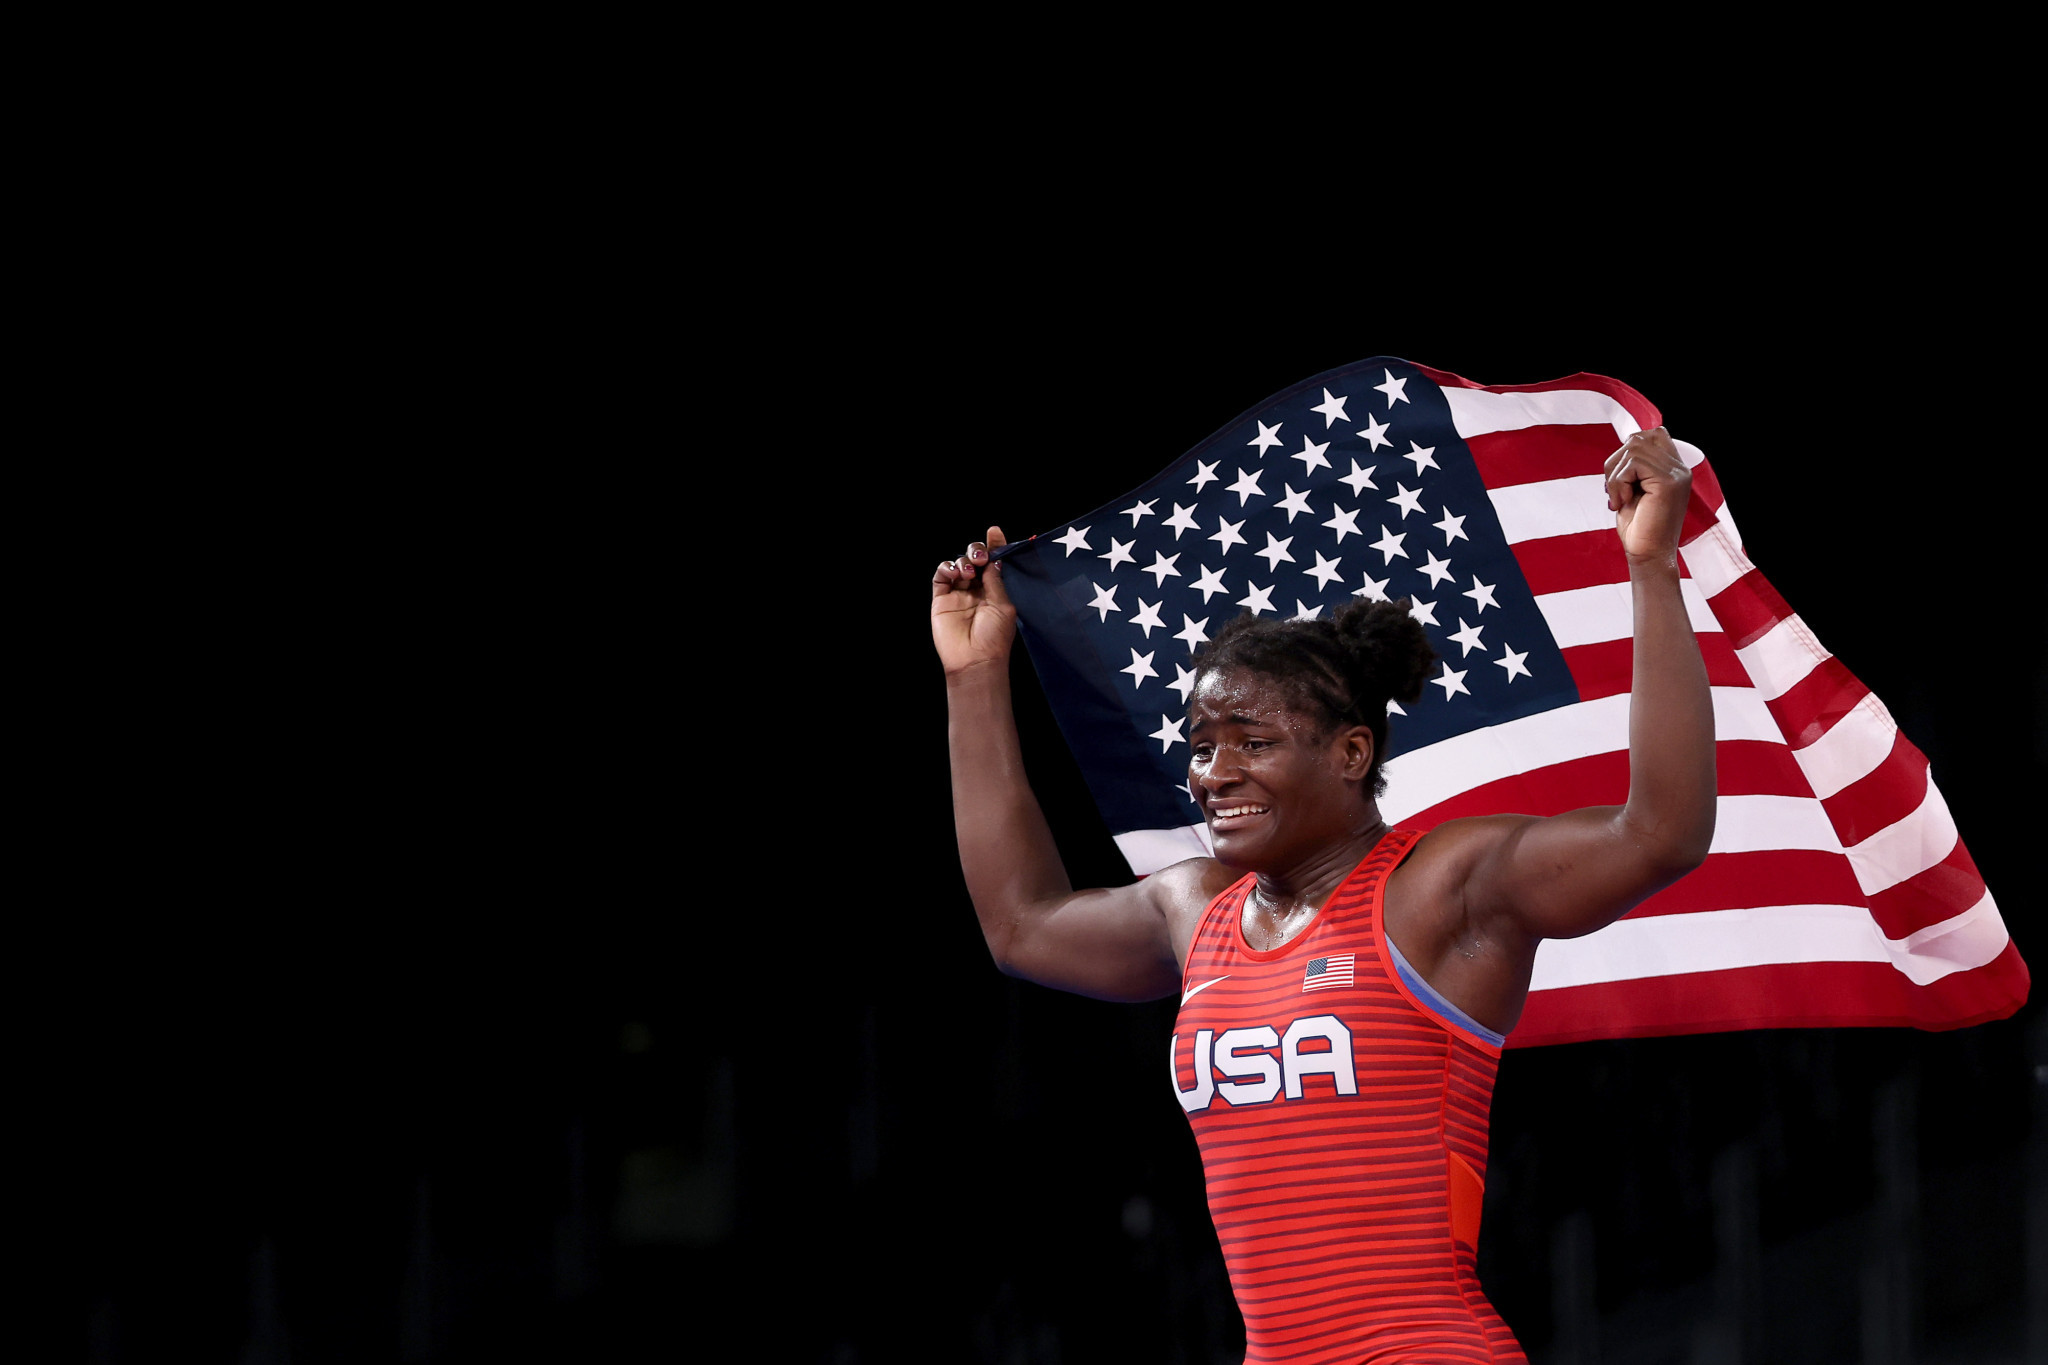 Tamyra Stock-Mensah of the US is back on top of the podium after a title win at the World Wrestling Championships ©Getty Images